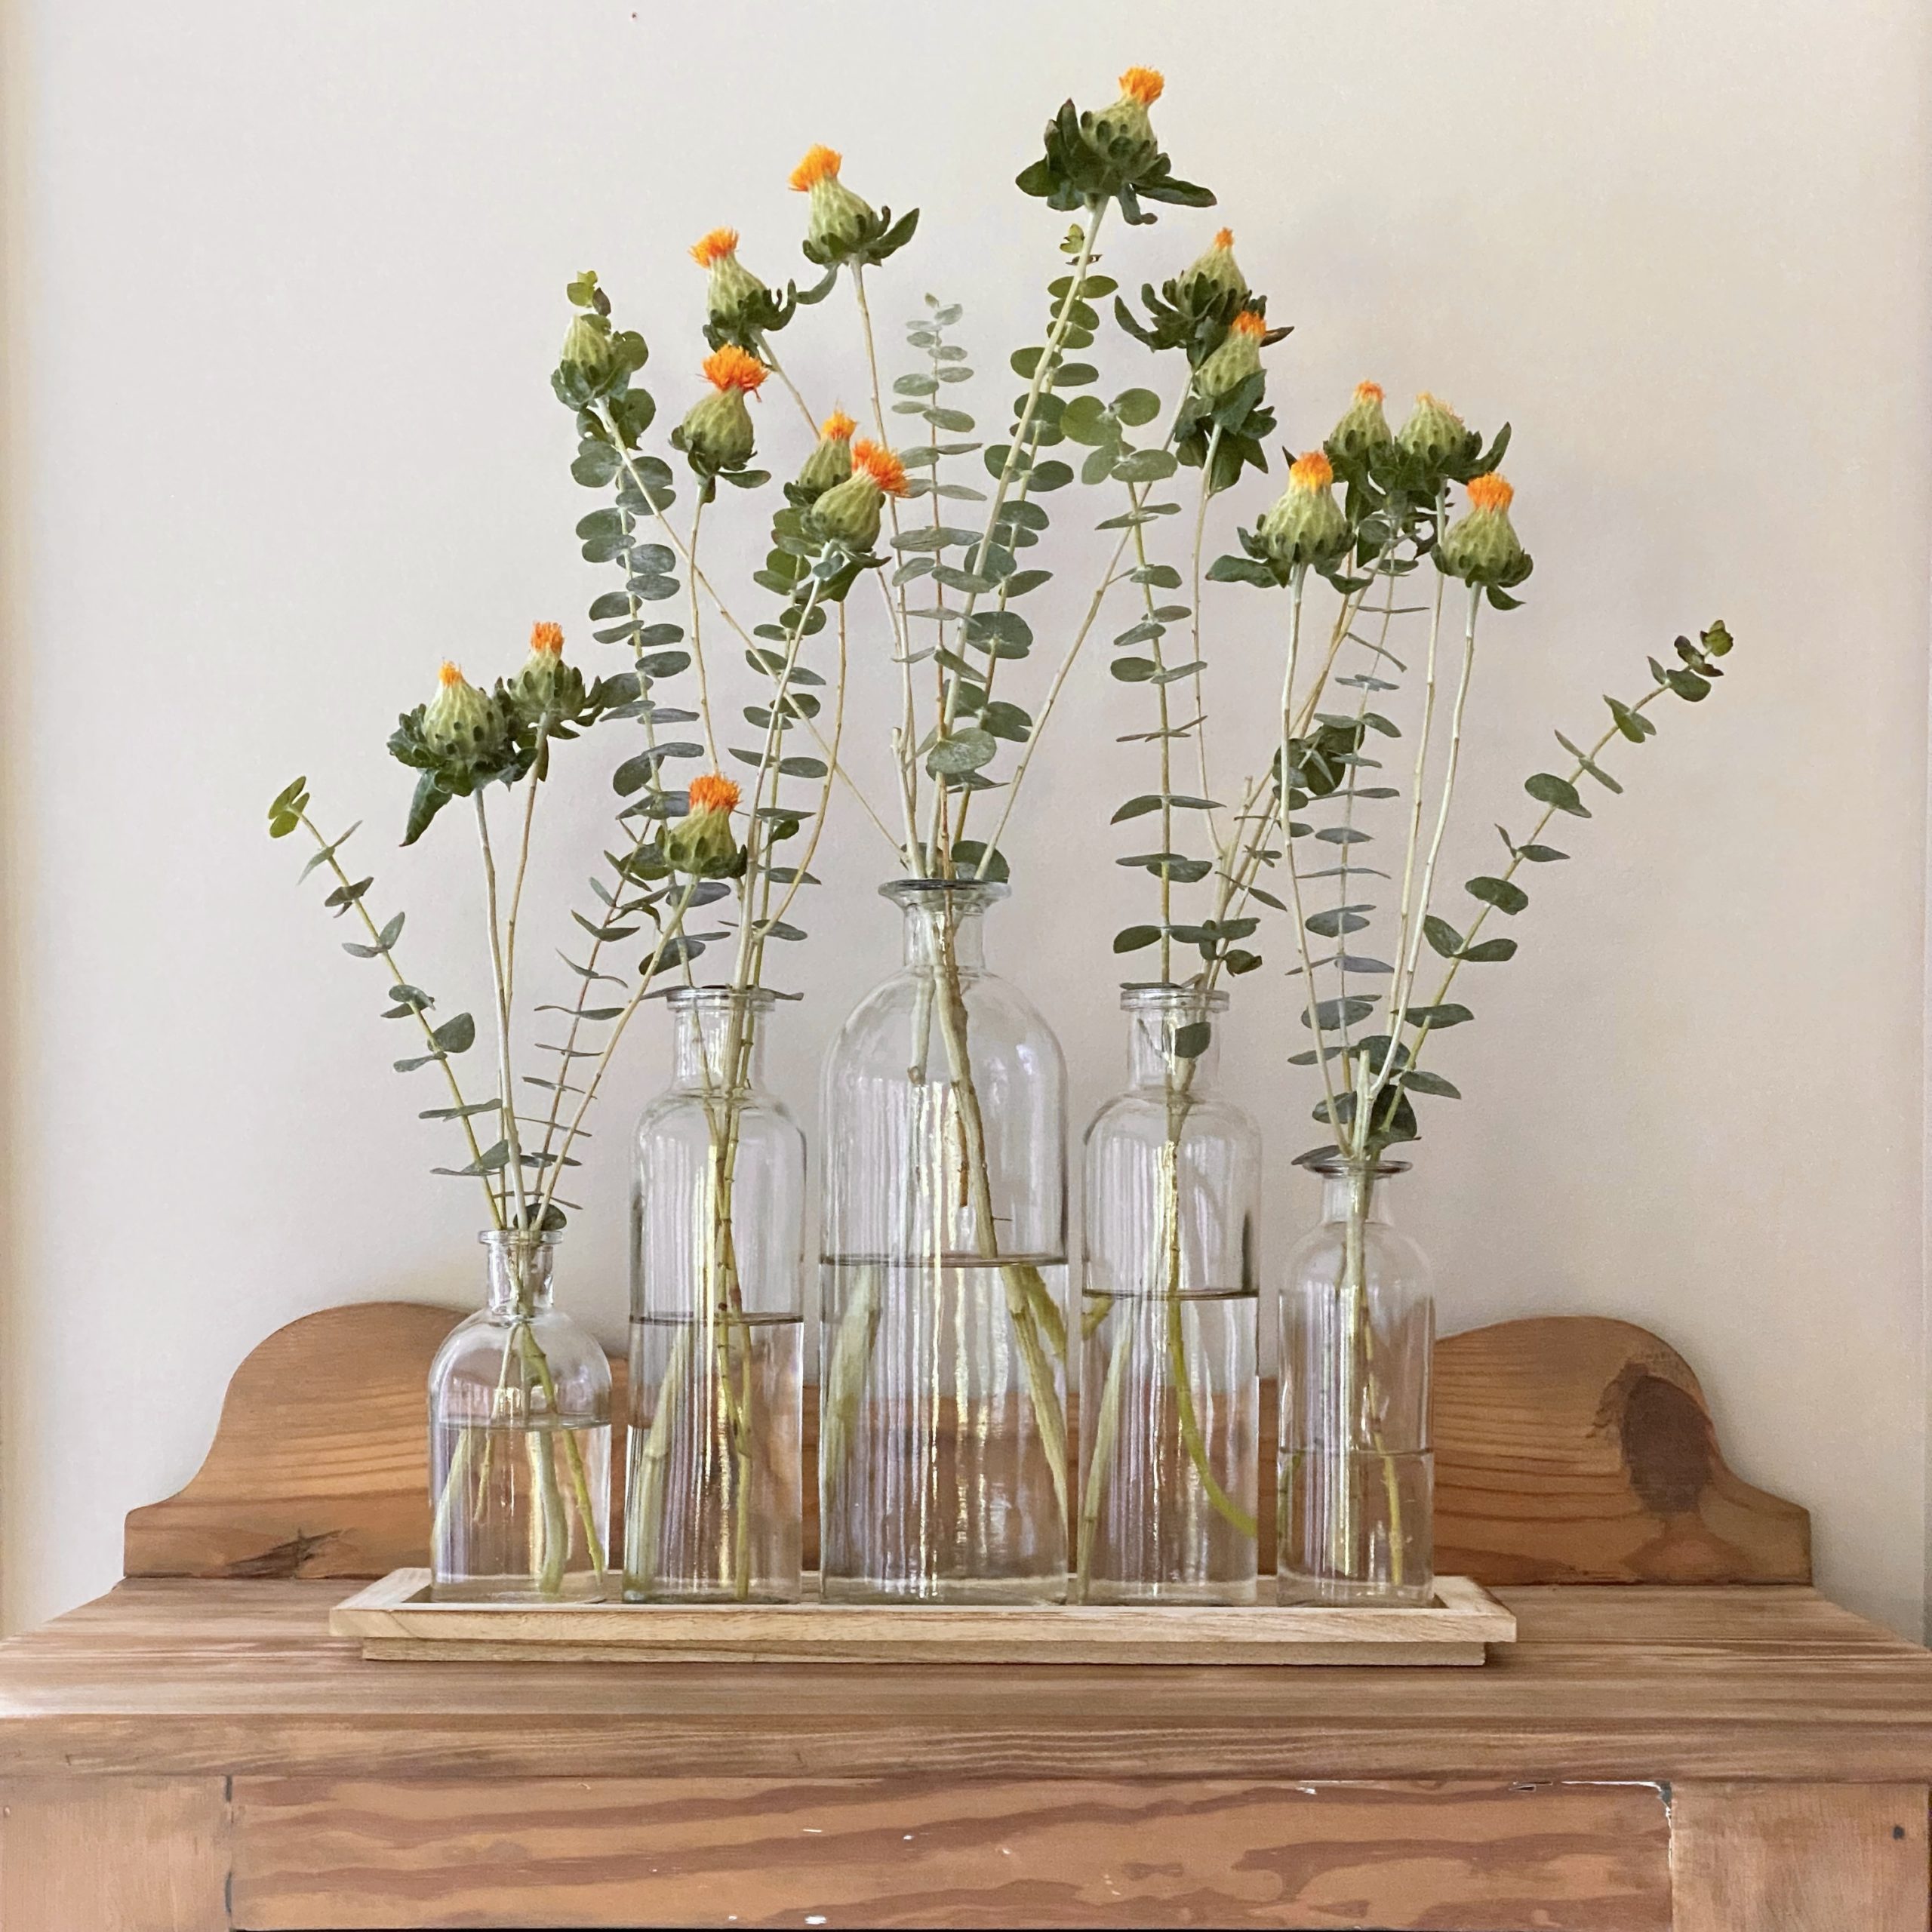 Vase set with 5 bottles on a wood tray with flowers in them on a table.